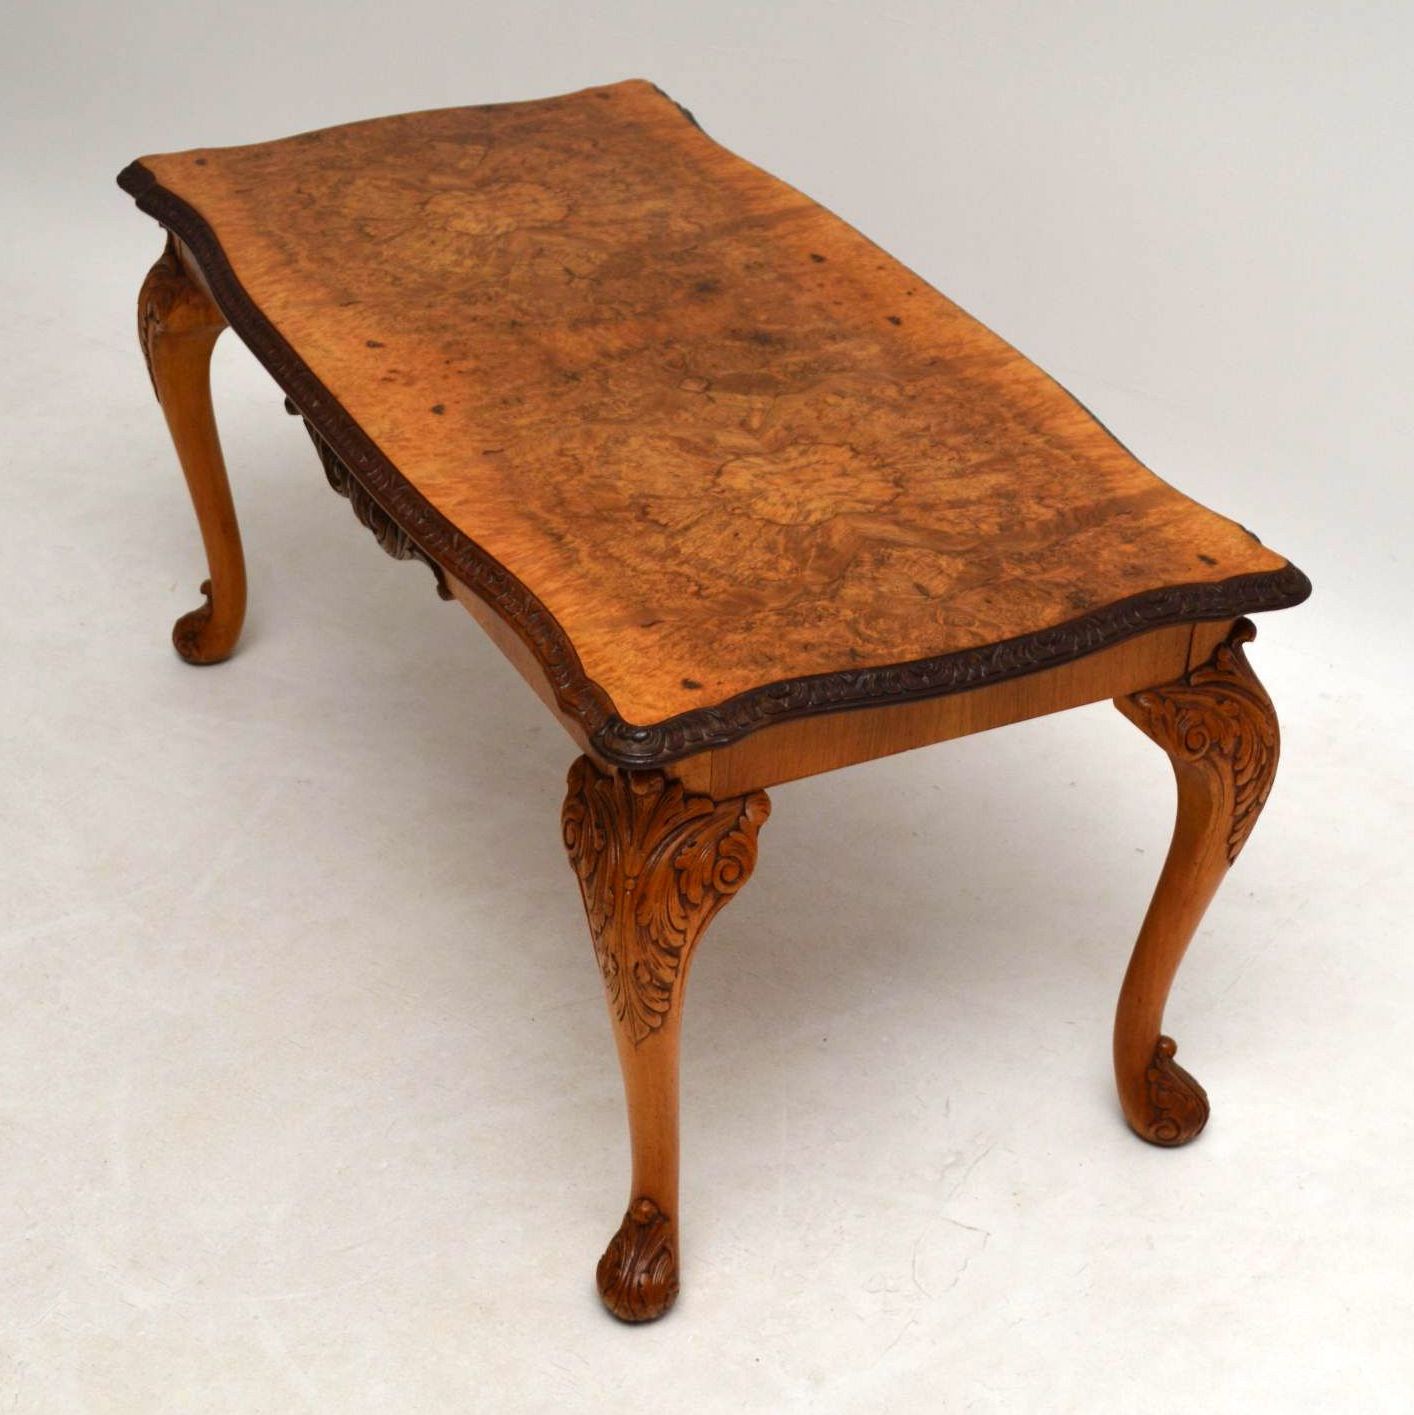 Antique Queen Anne Style Burr Walnut Coffee Table Pertaining To Trendy Antique White Black Coffee Tables (View 6 of 20)